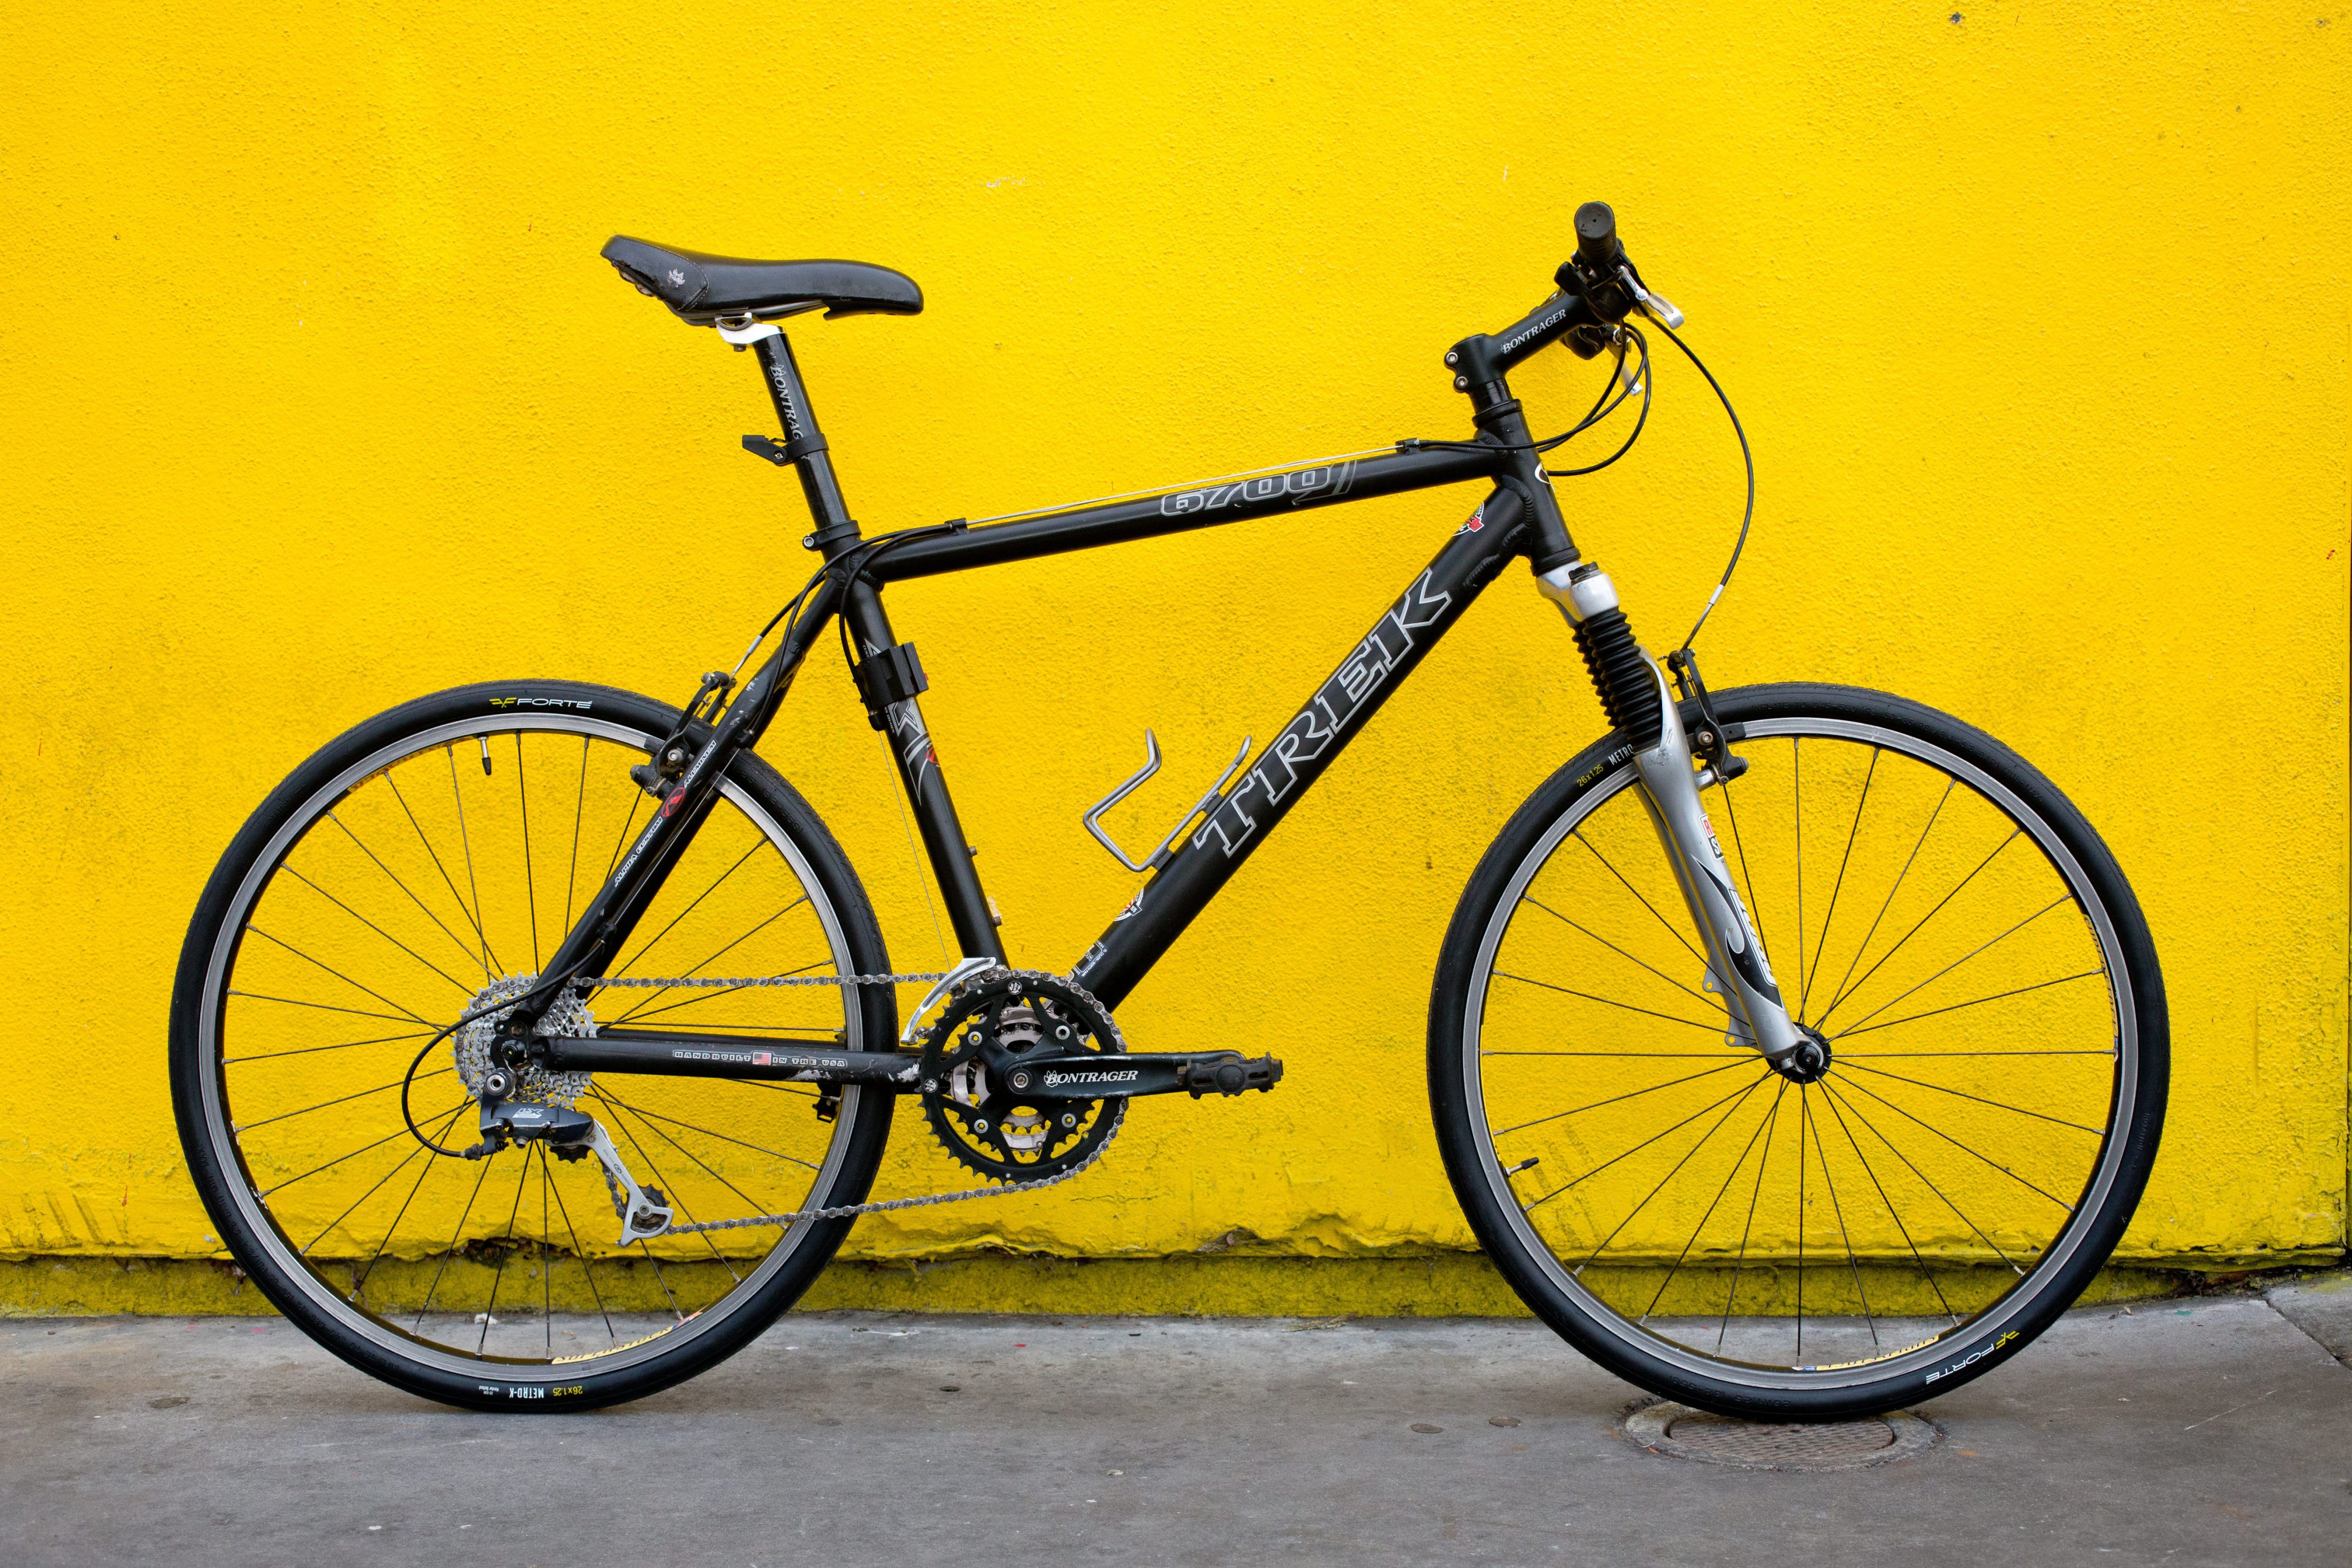 Black Trek mountain bike with road tires in front of a yellow wall in San Diego's neighborhood Pacific Beach, in March 2015. (Frank Duenzl—picture-alliance/DP/AP)